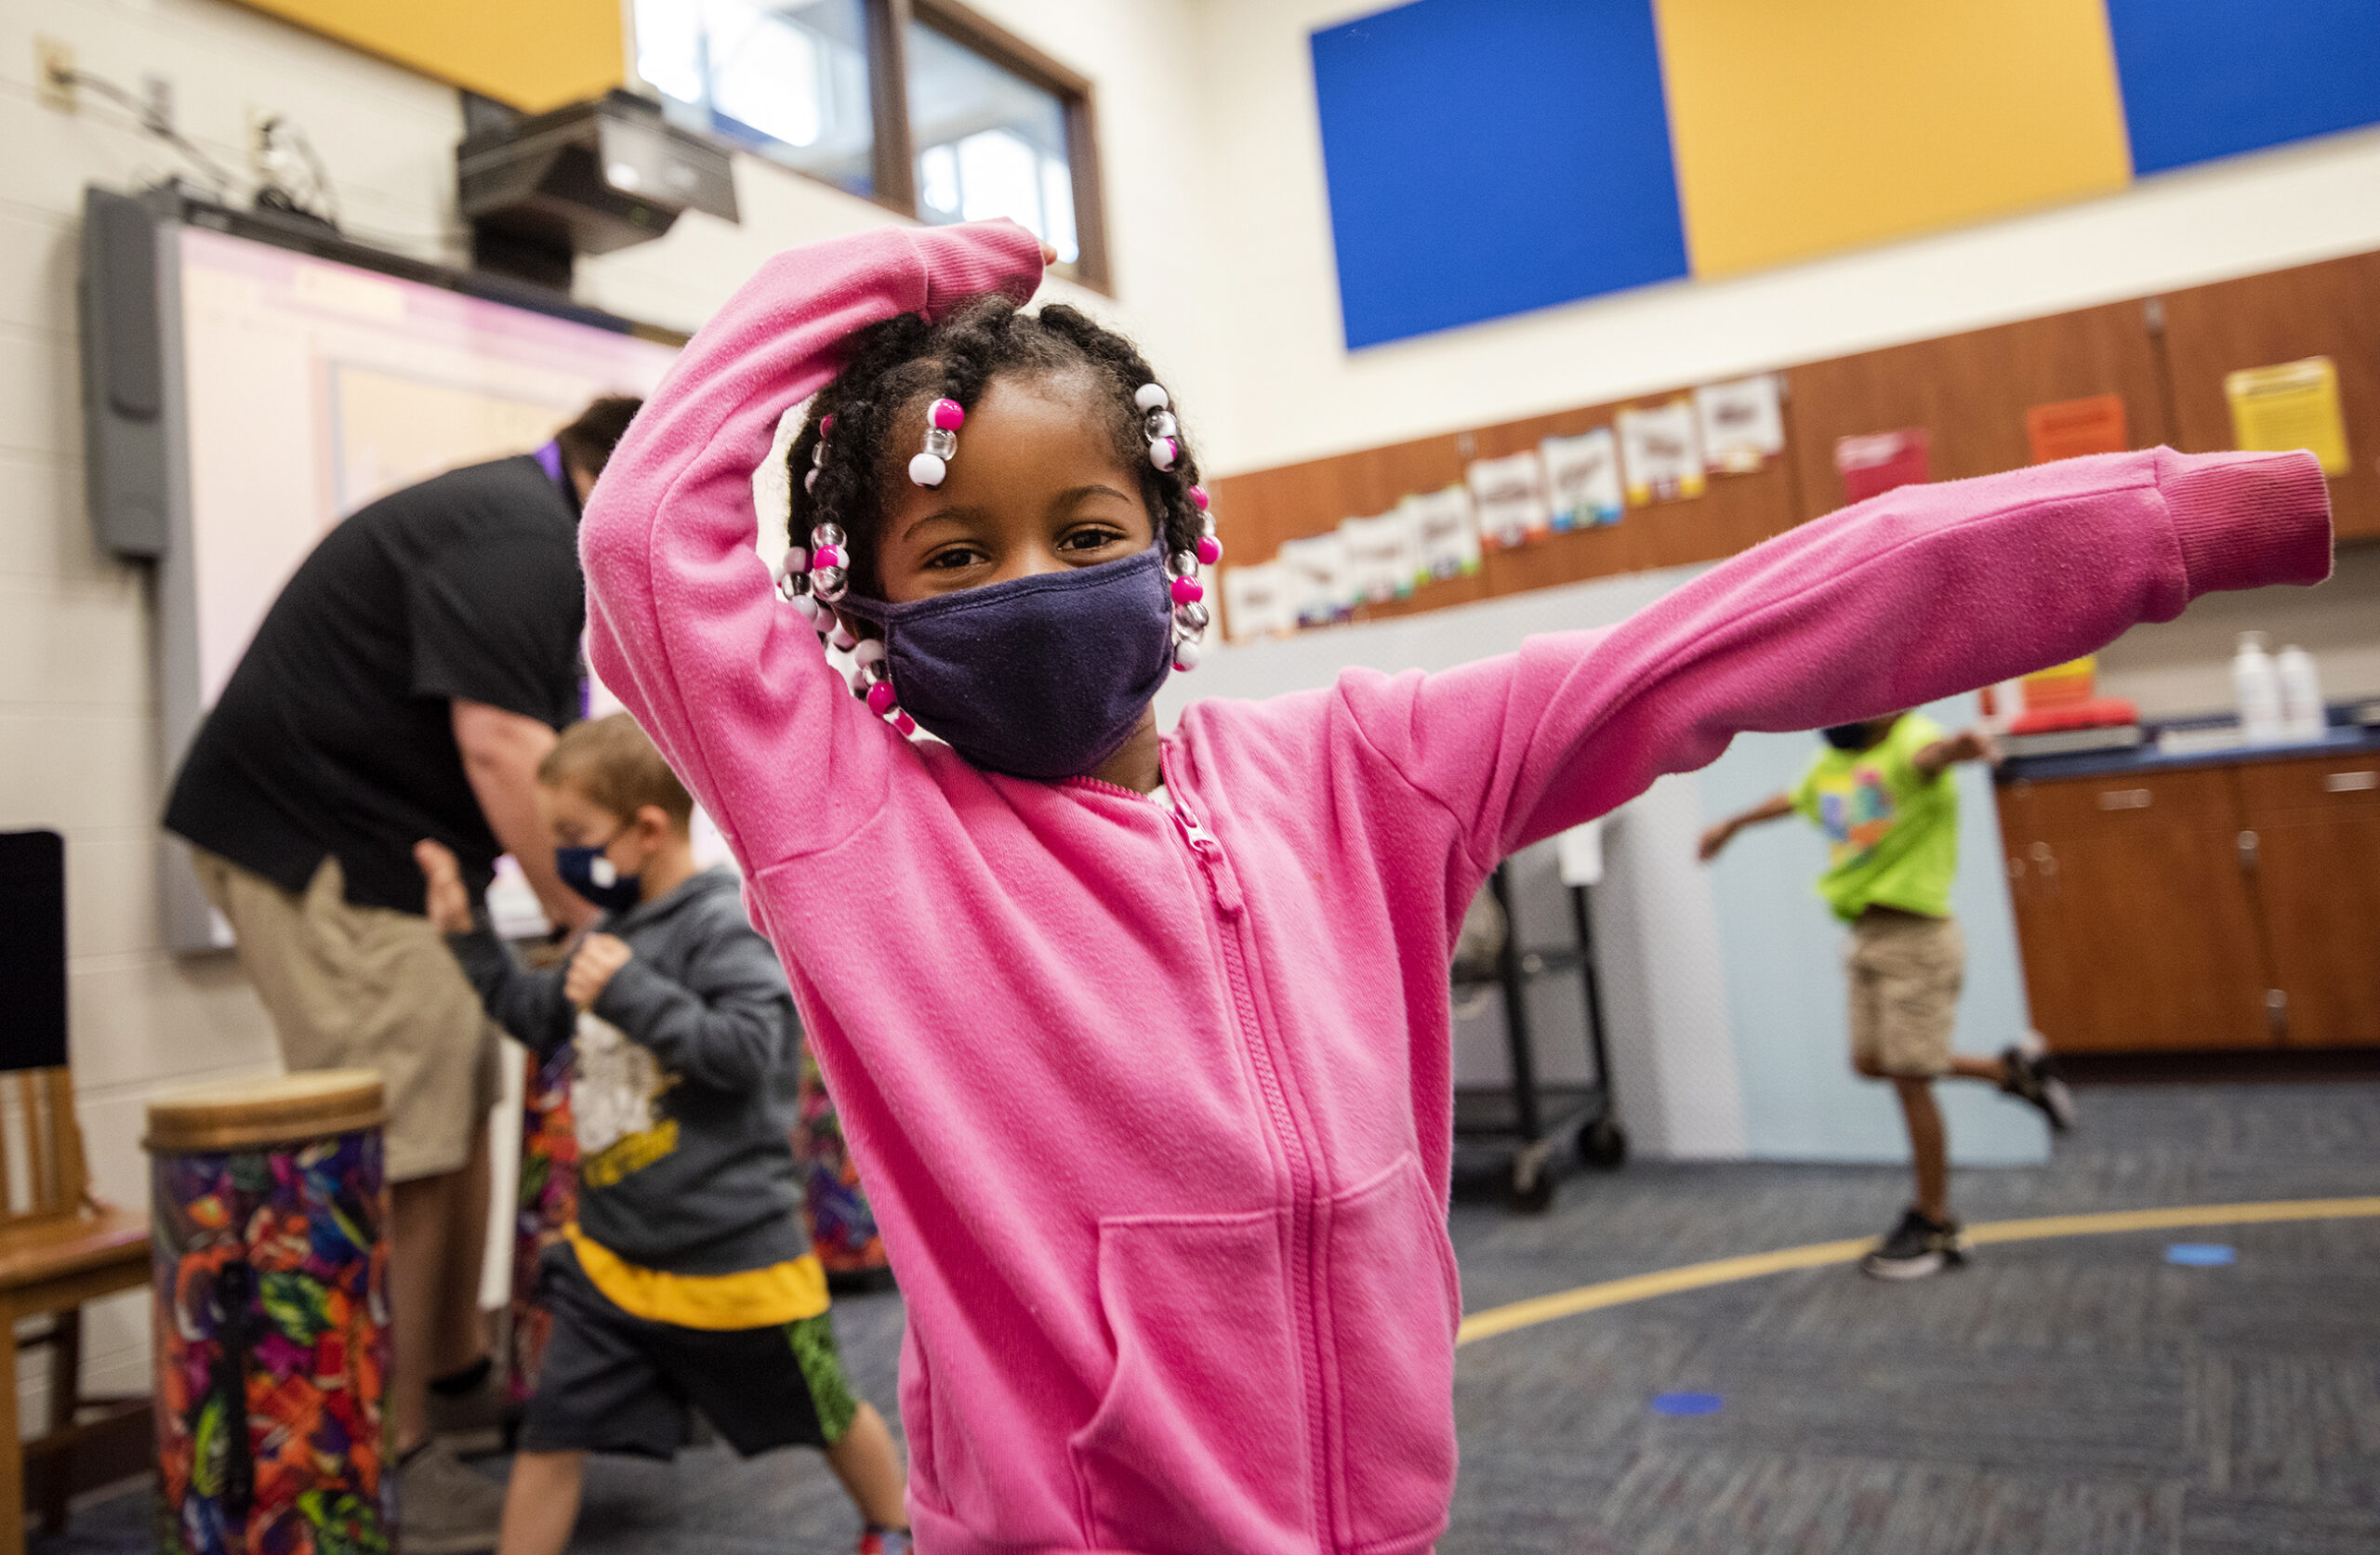 A girl in a pink jacket wears a face mask as she dances in class.